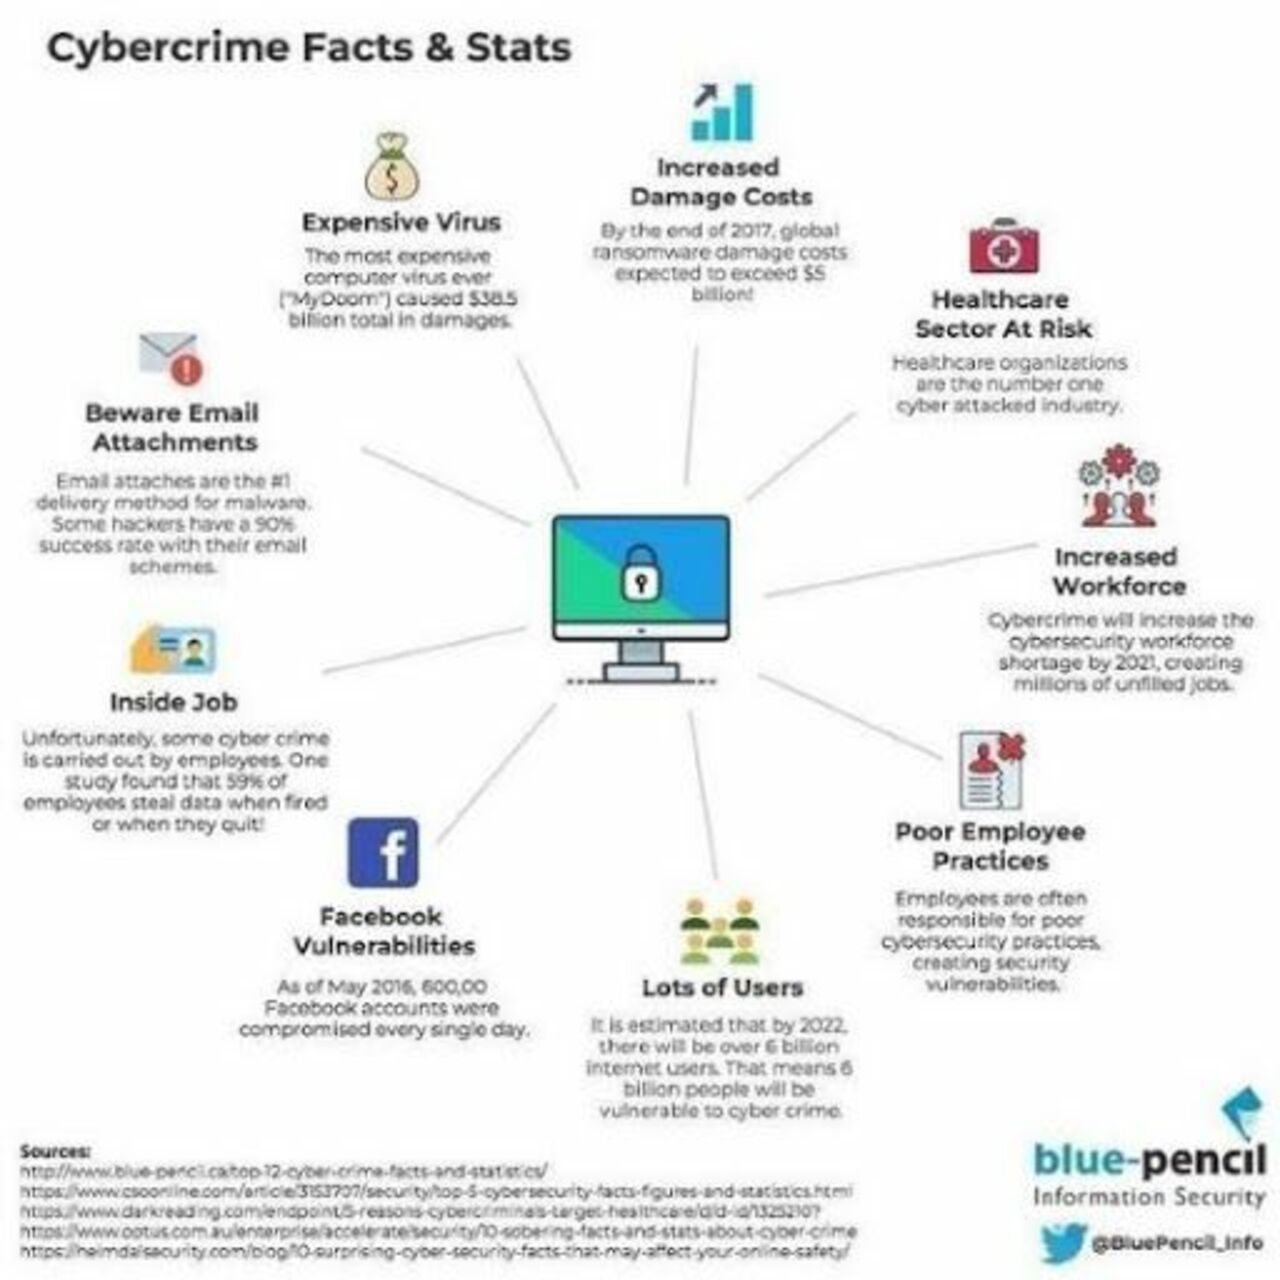 #CyberCrime Facts And Stats by @BluePencil_Info #IoT #BigData #InternetofThings #DataScience #Tech #Technology #Fintech #Marketing #CyberSecurity #Data #DataAnalytics #Analysis #Innovation #Business #Influencer cc: @paula_piccard @ronald_vanloon @mhiesboeck https://t.co/KvB81C1aH5